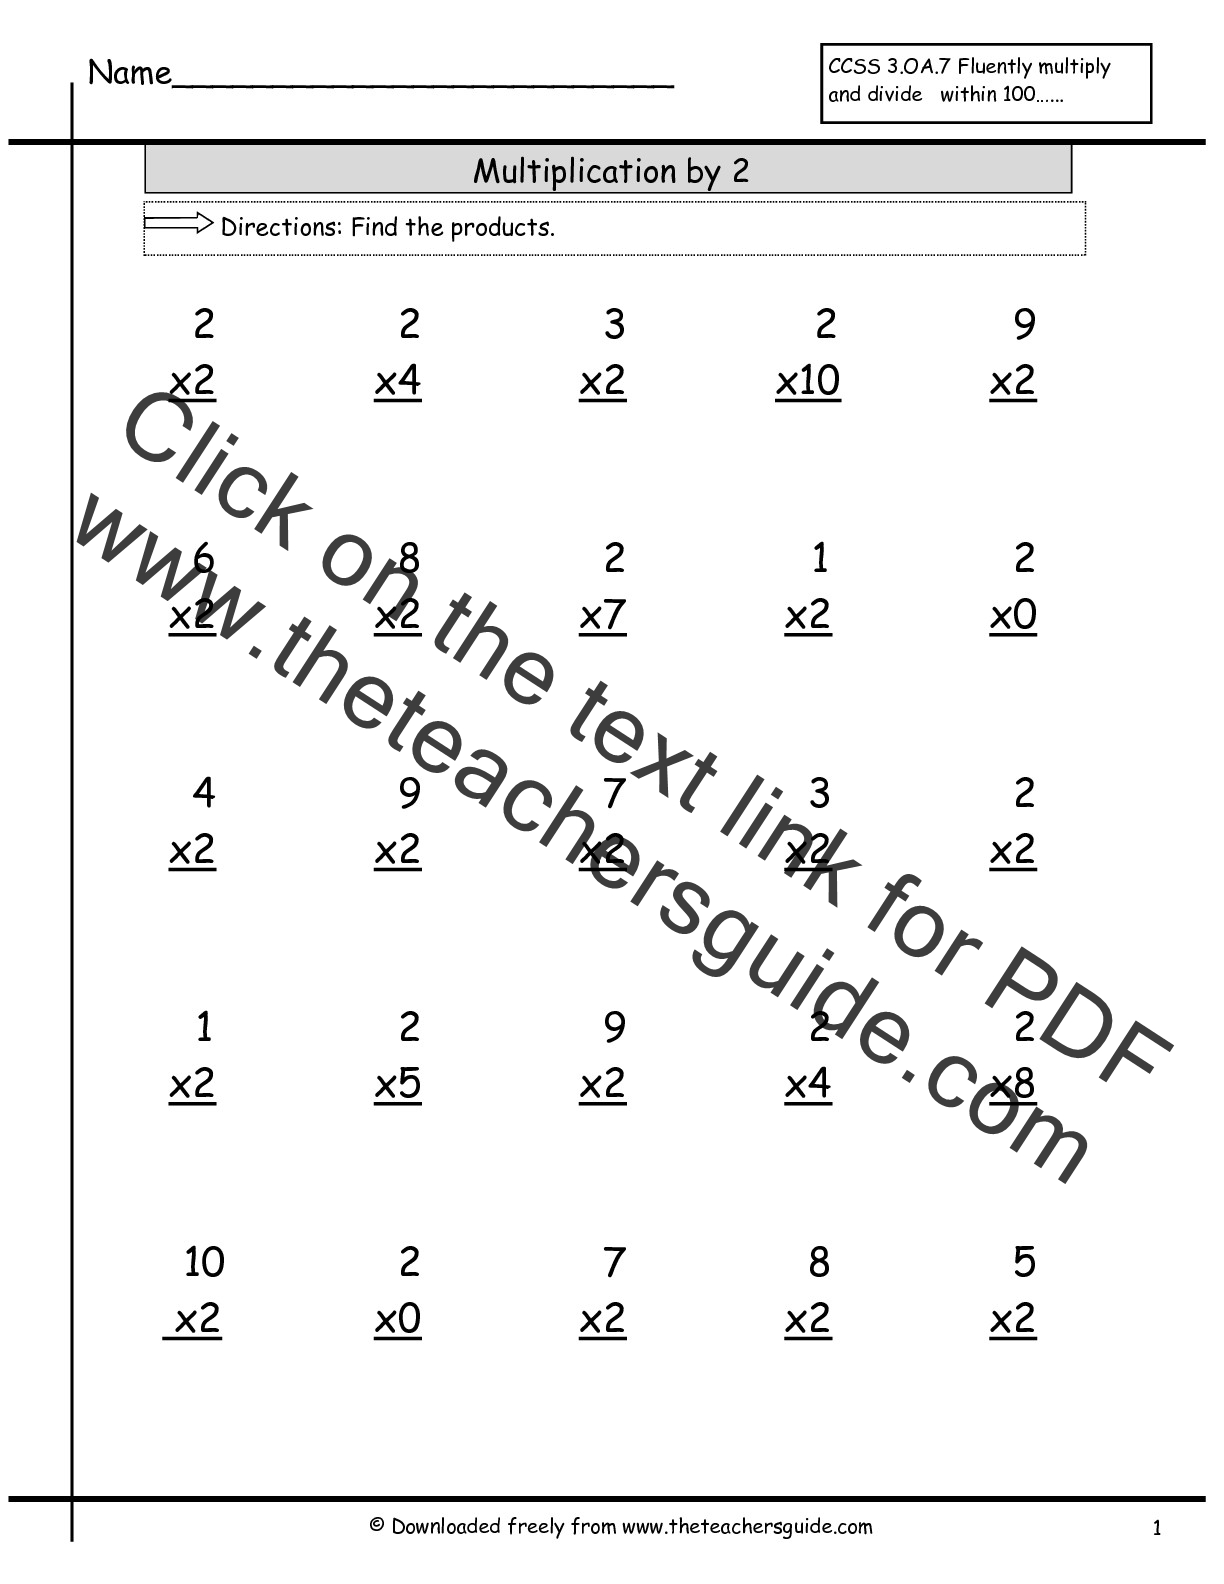  Multiplication Facts Worksheets From The Teacher s Guide